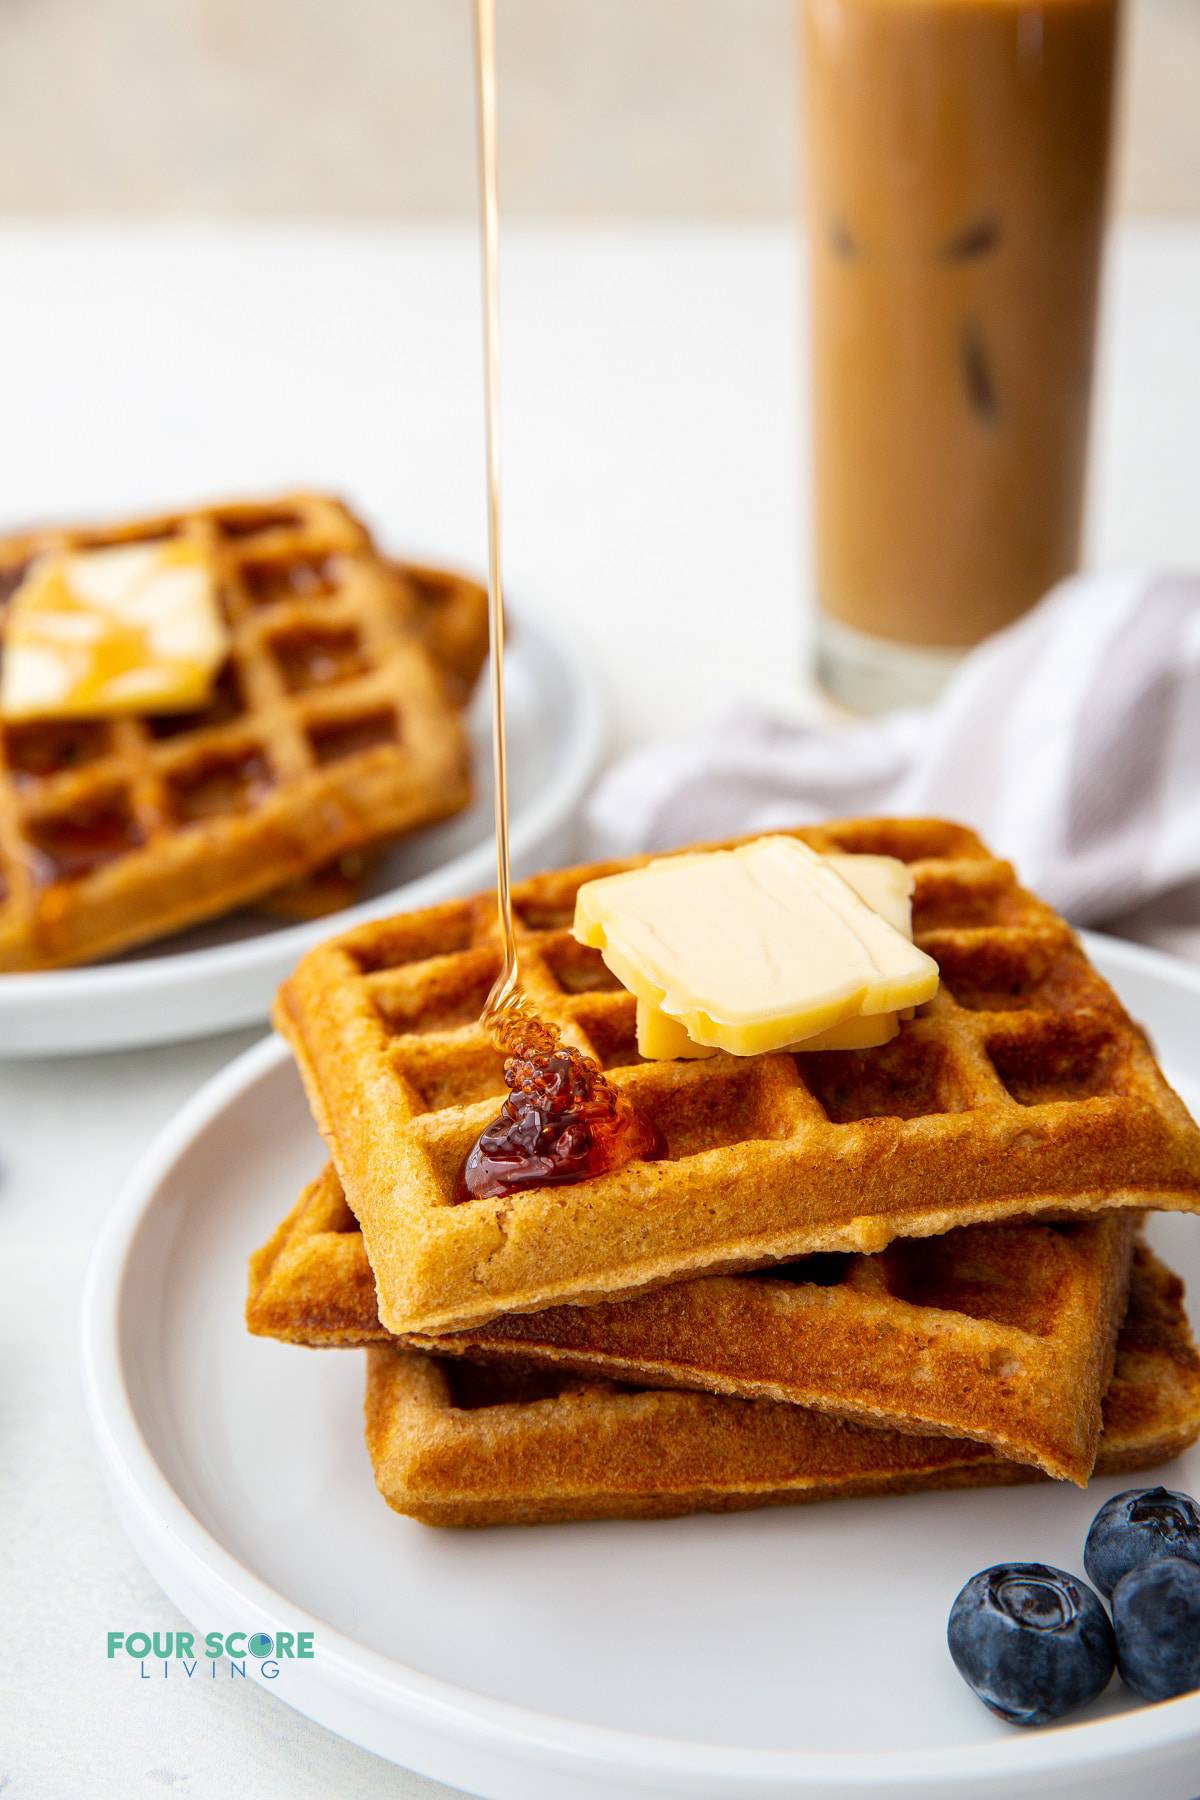 a plate of three square keto waffles topped with two pats of butter. Syrup is being poured on top. an iced coffee is in the background.